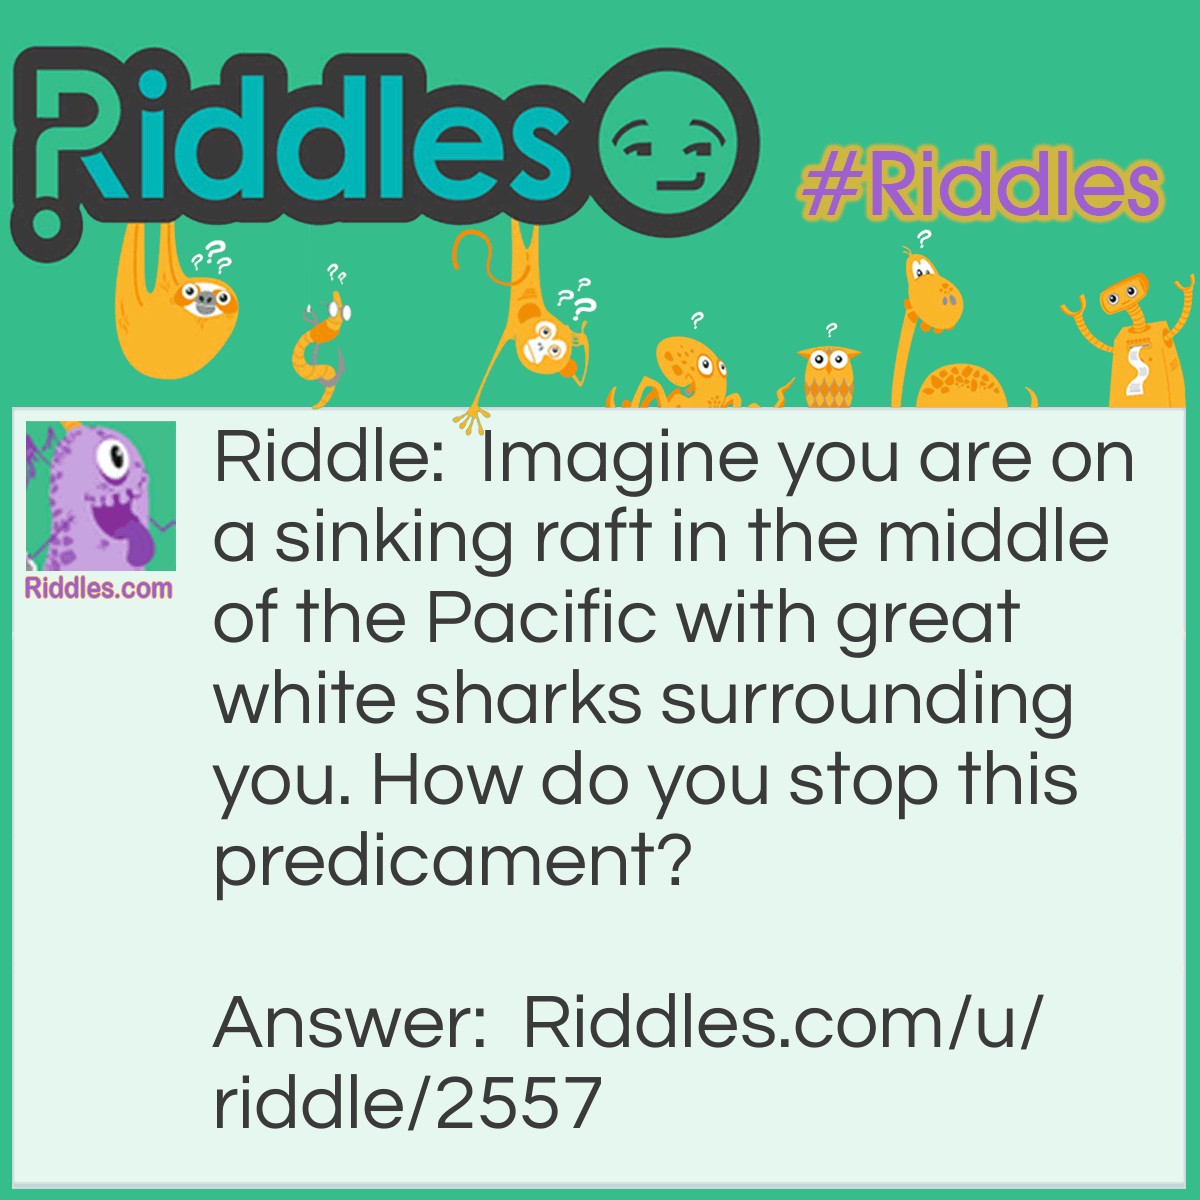 Riddle: Imagine you are on a sinking raft in the middle of the Pacific with great white sharks surrounding you. How do you stop this predicament? Answer: Stop imagining!